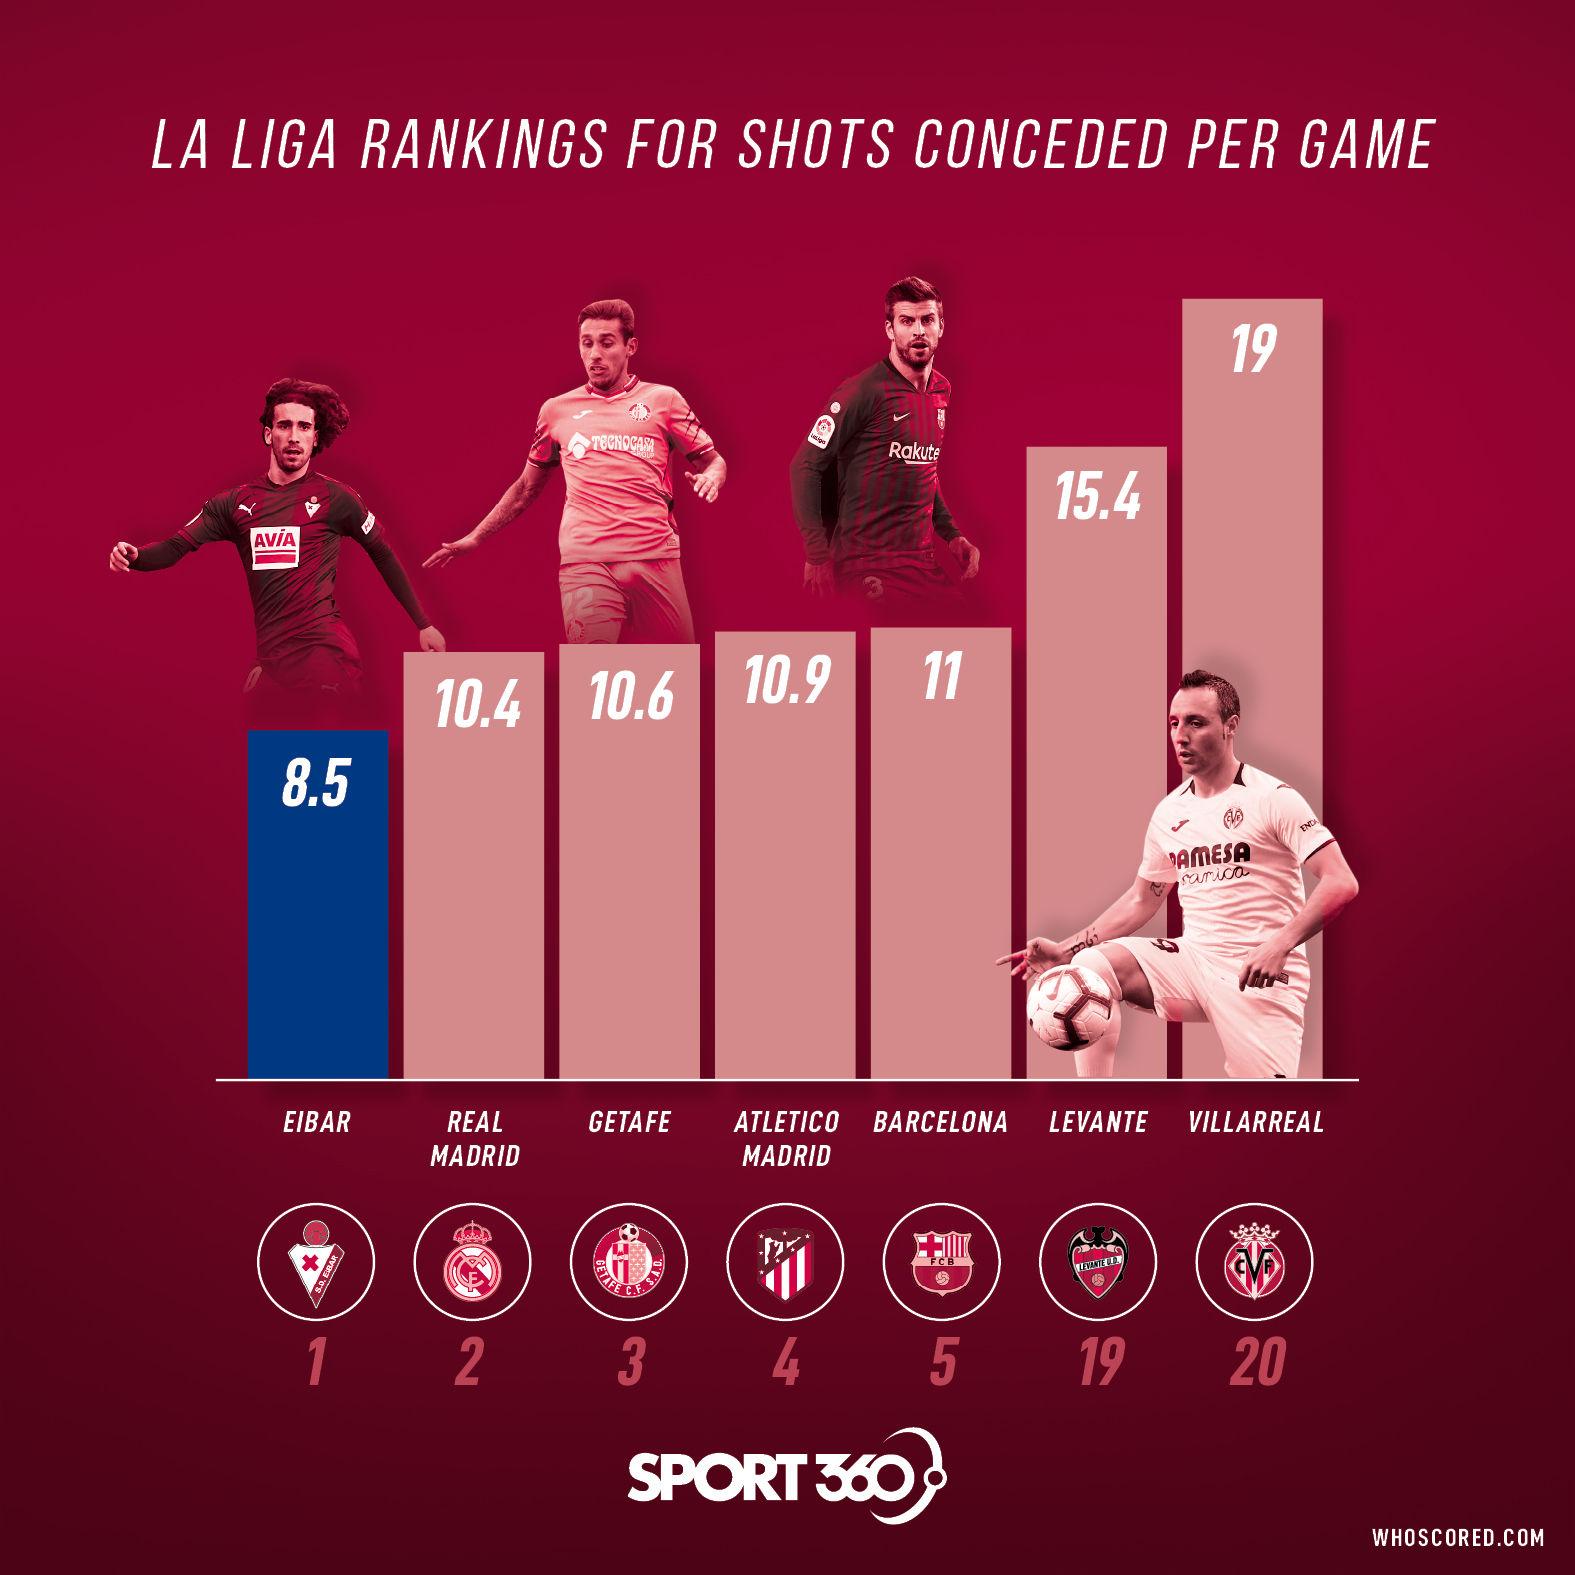 Shots conceded per game: Eibar leading the way